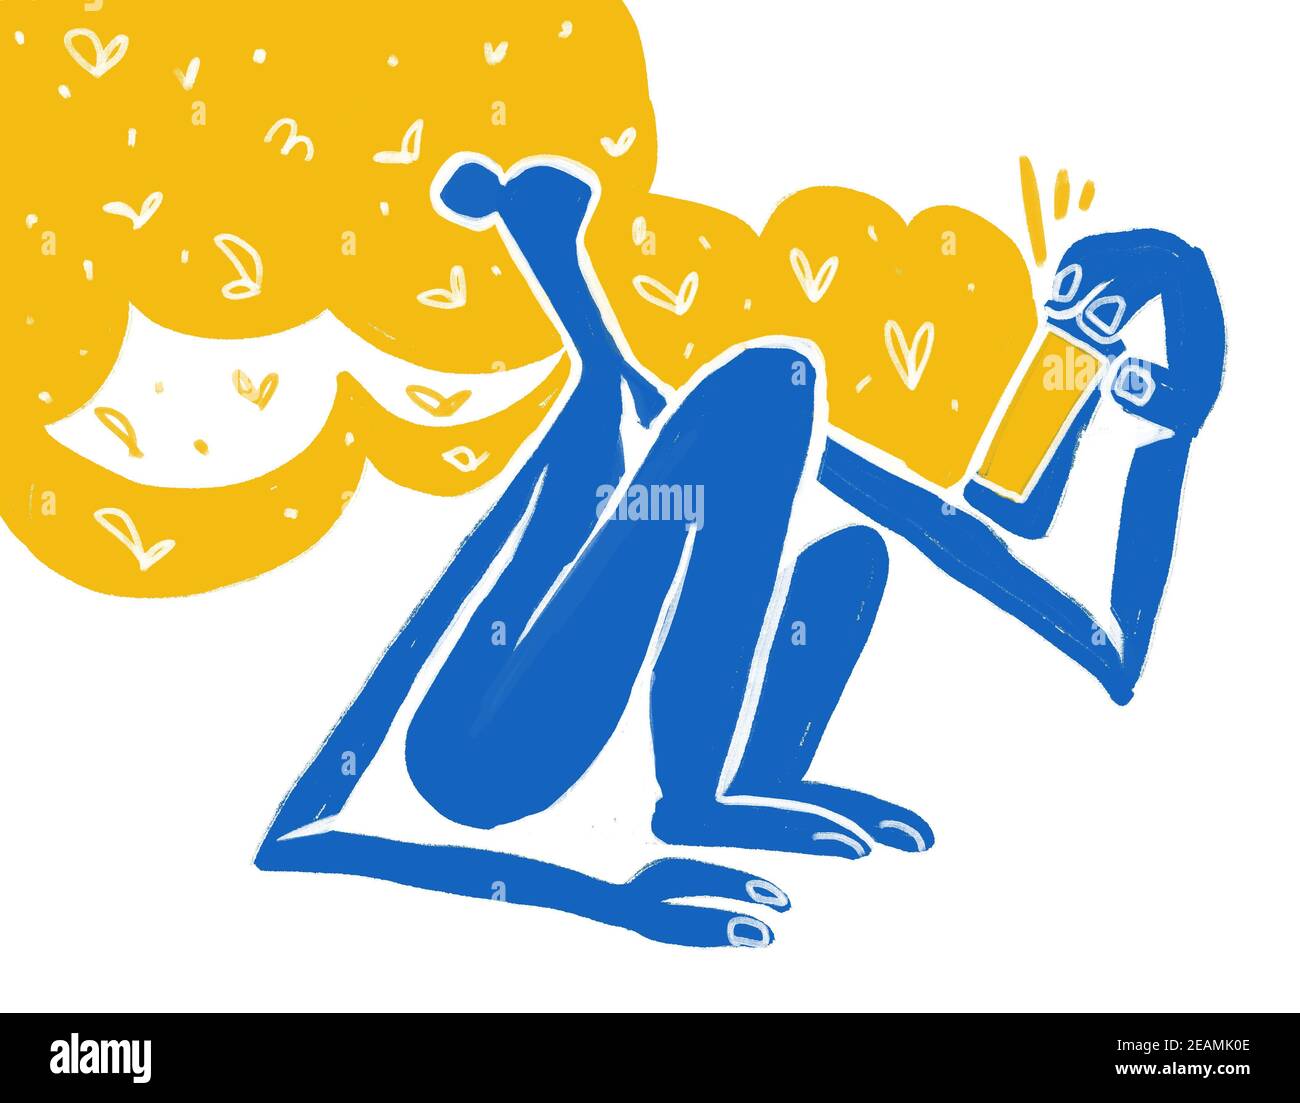 Primitive human siting on floor and taking her phone. modern and trendy illustration. Cut out painting with blue and yellow. Henry Matisse and fauvism vibe Stock Photo